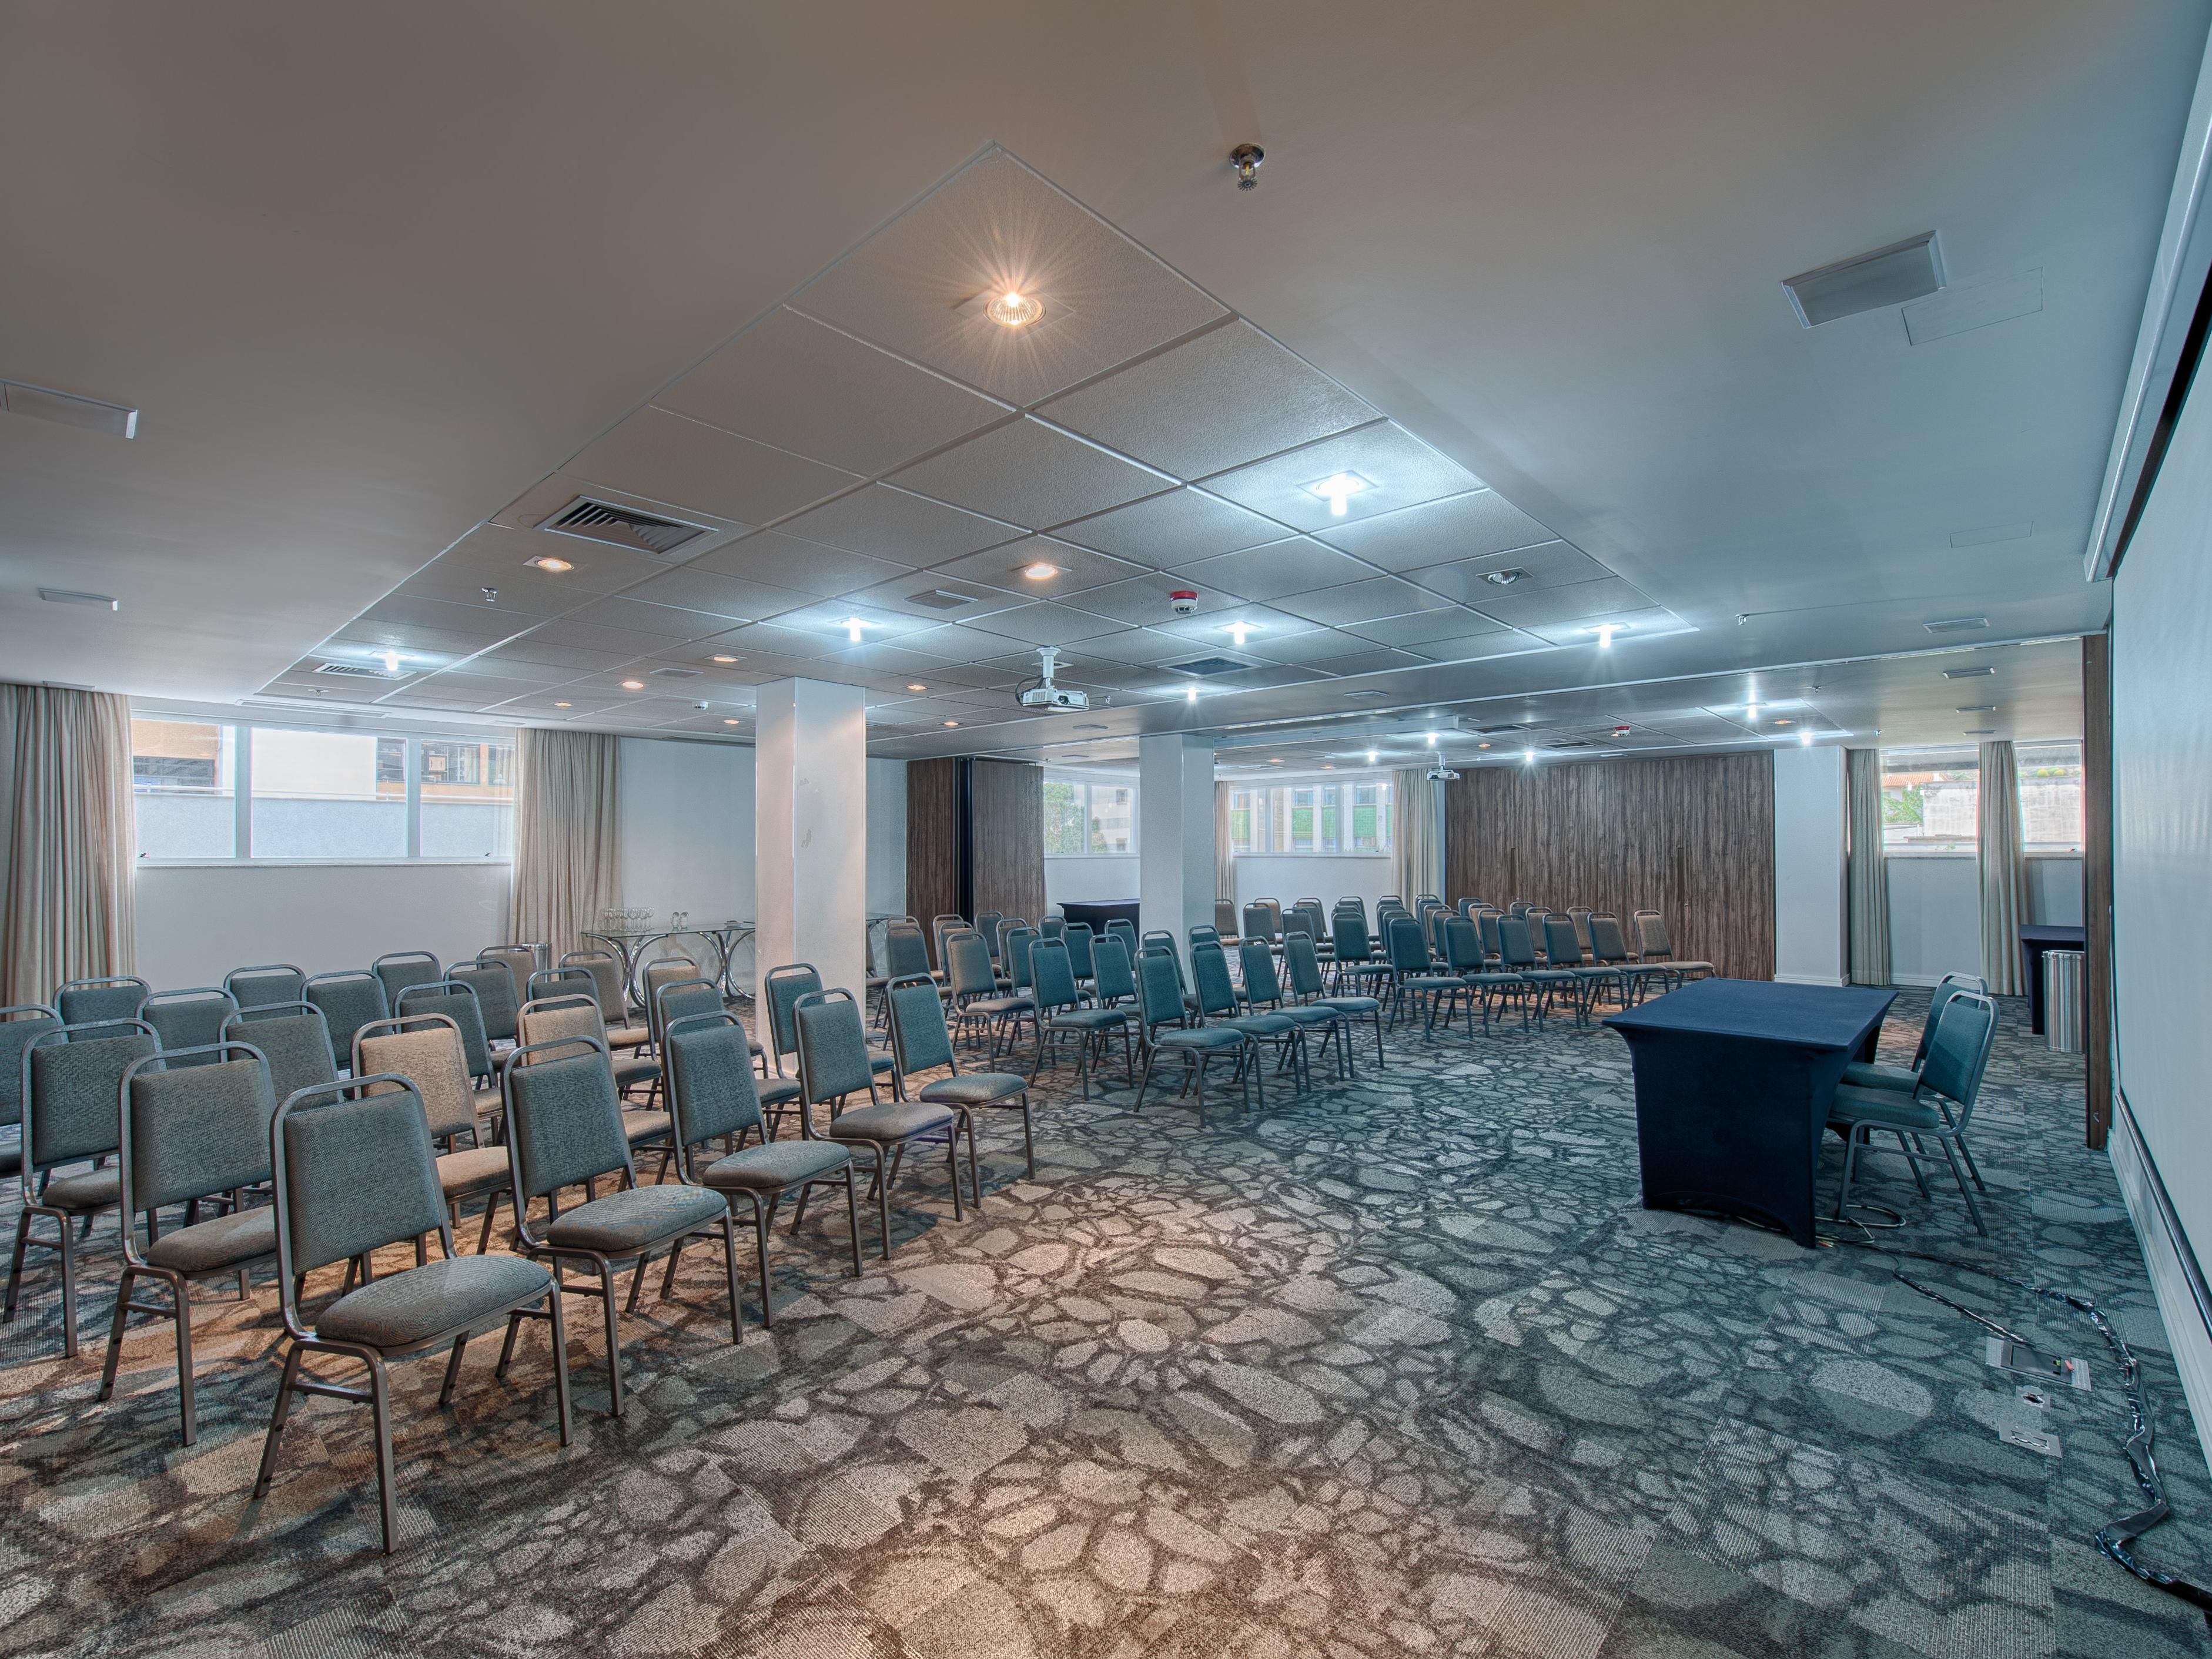 We have rooms and all the equipment prepared to receive your meeting in our Hotel.